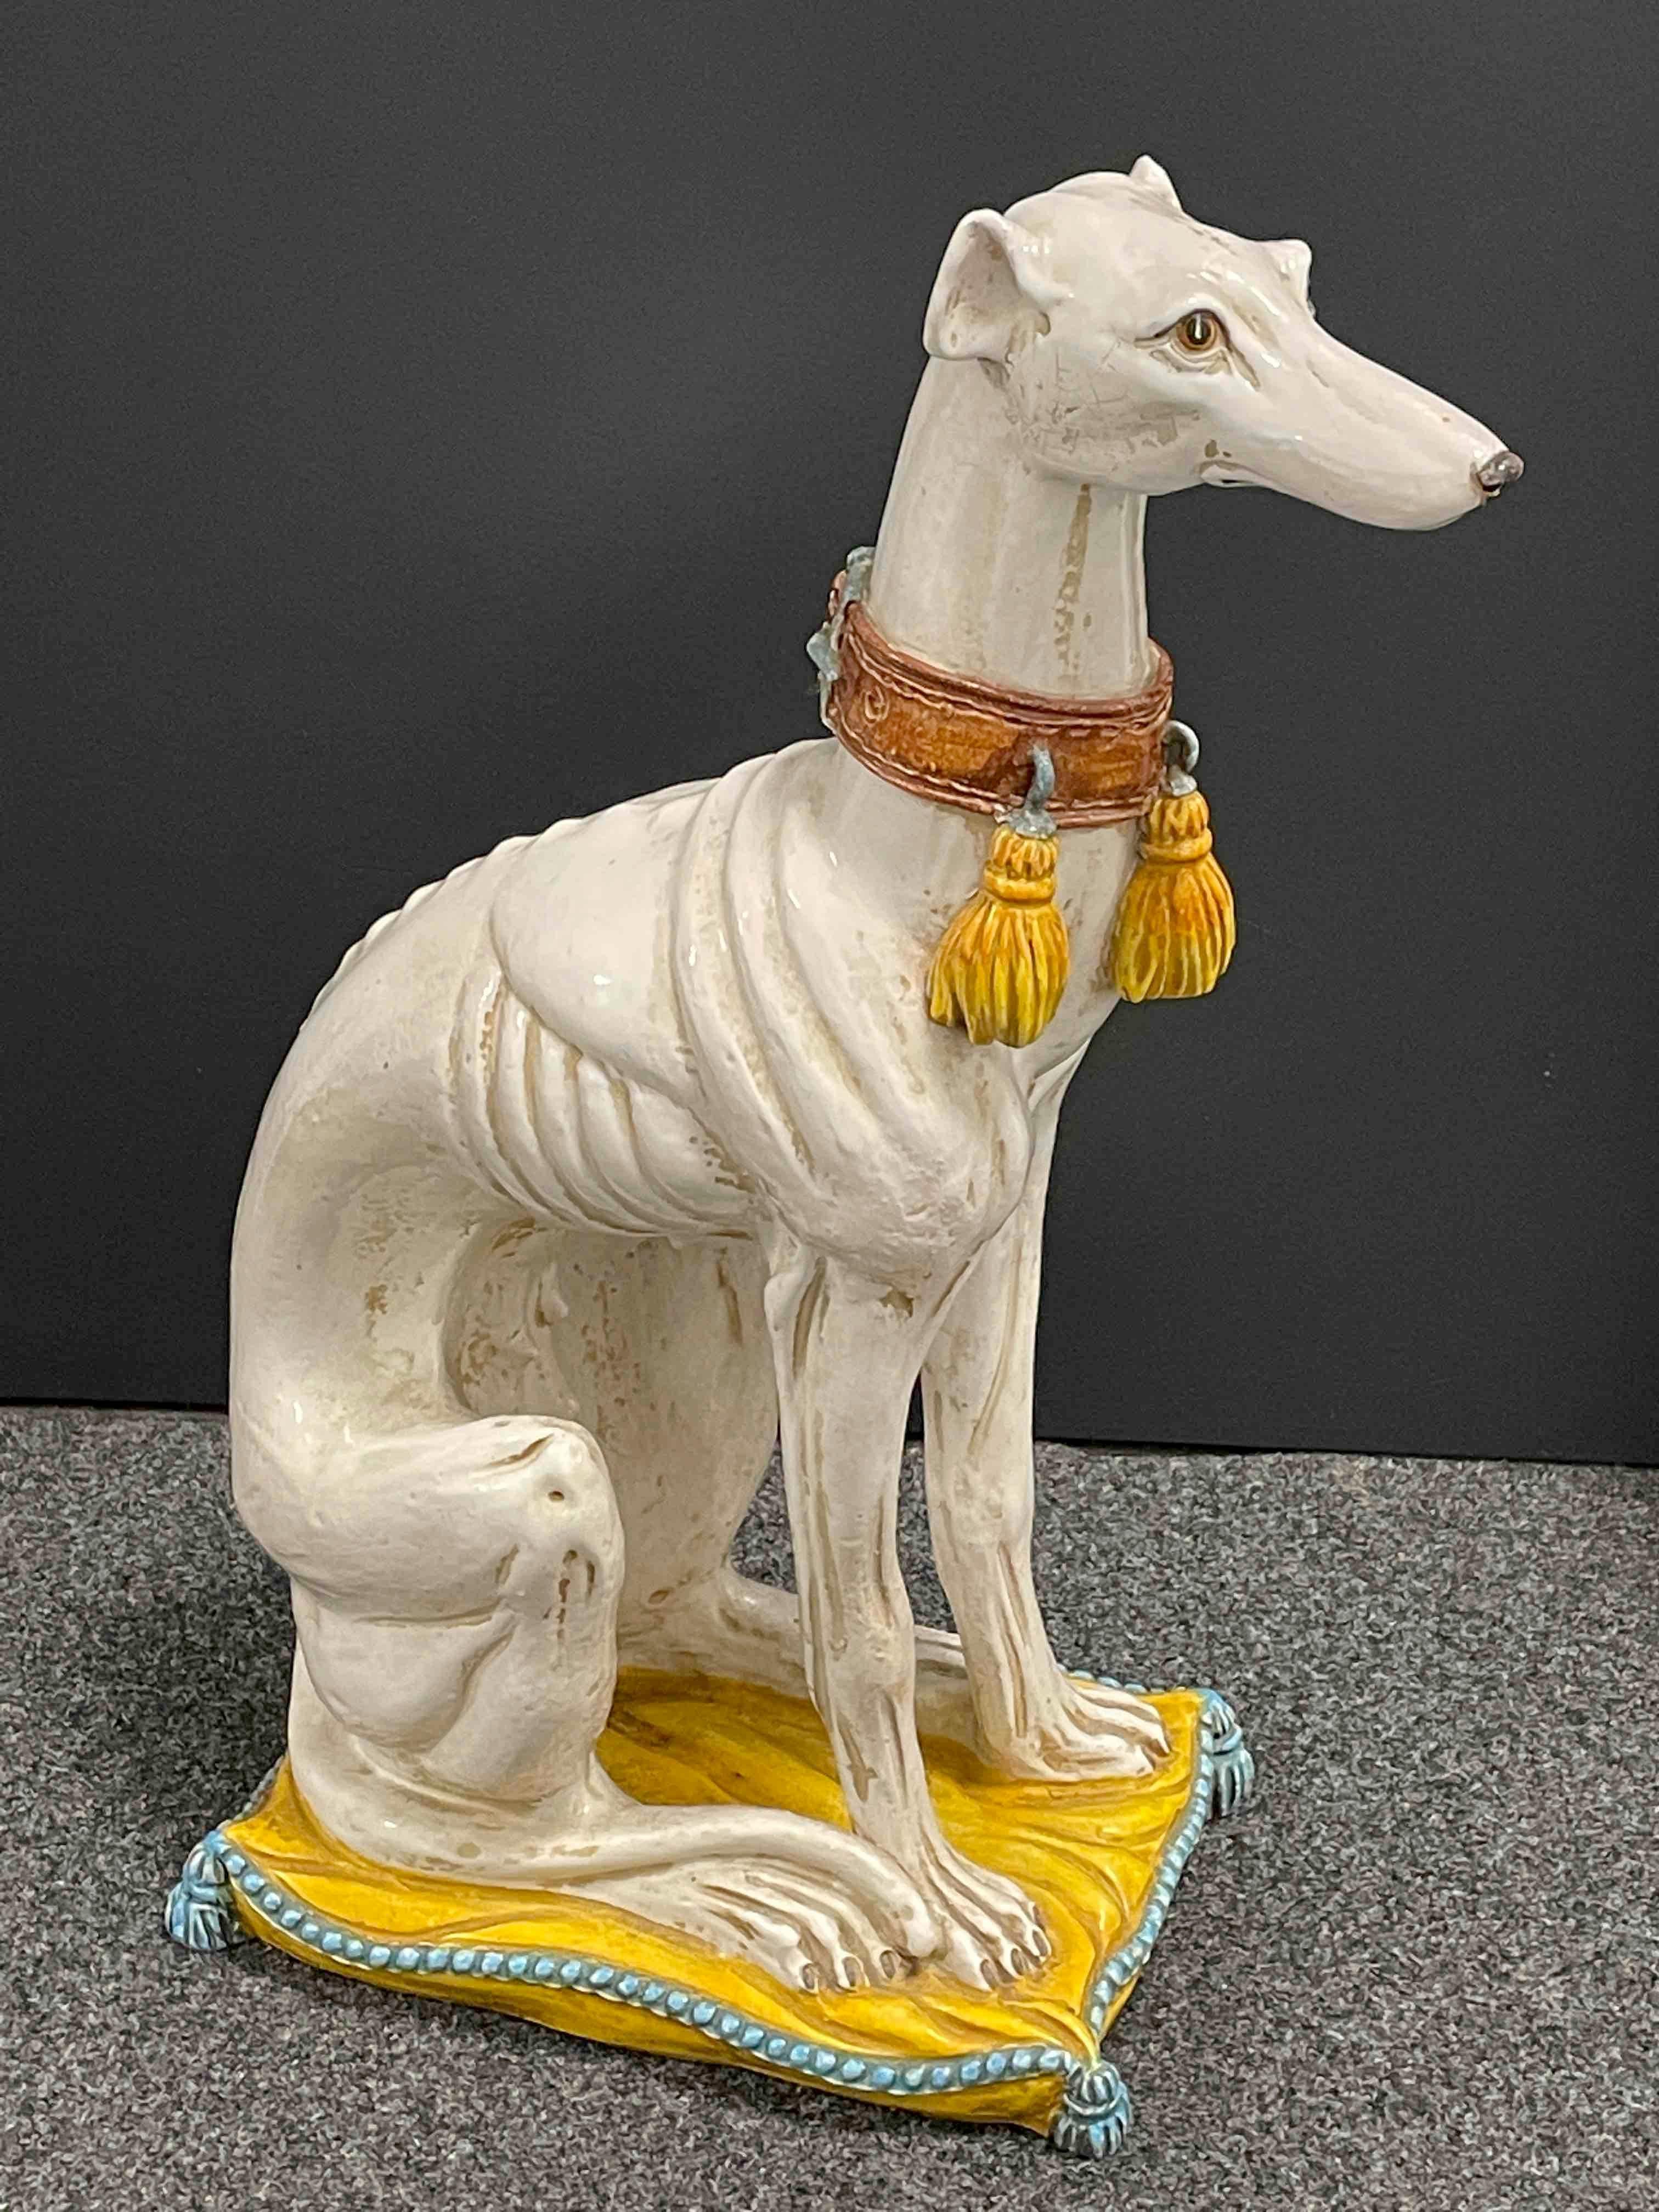 Classic early 1960s Italian Greyhound Majolica dog statue figurine. Nice addition to your room or entry hall. Made of Majolica ceramic, hand painted.